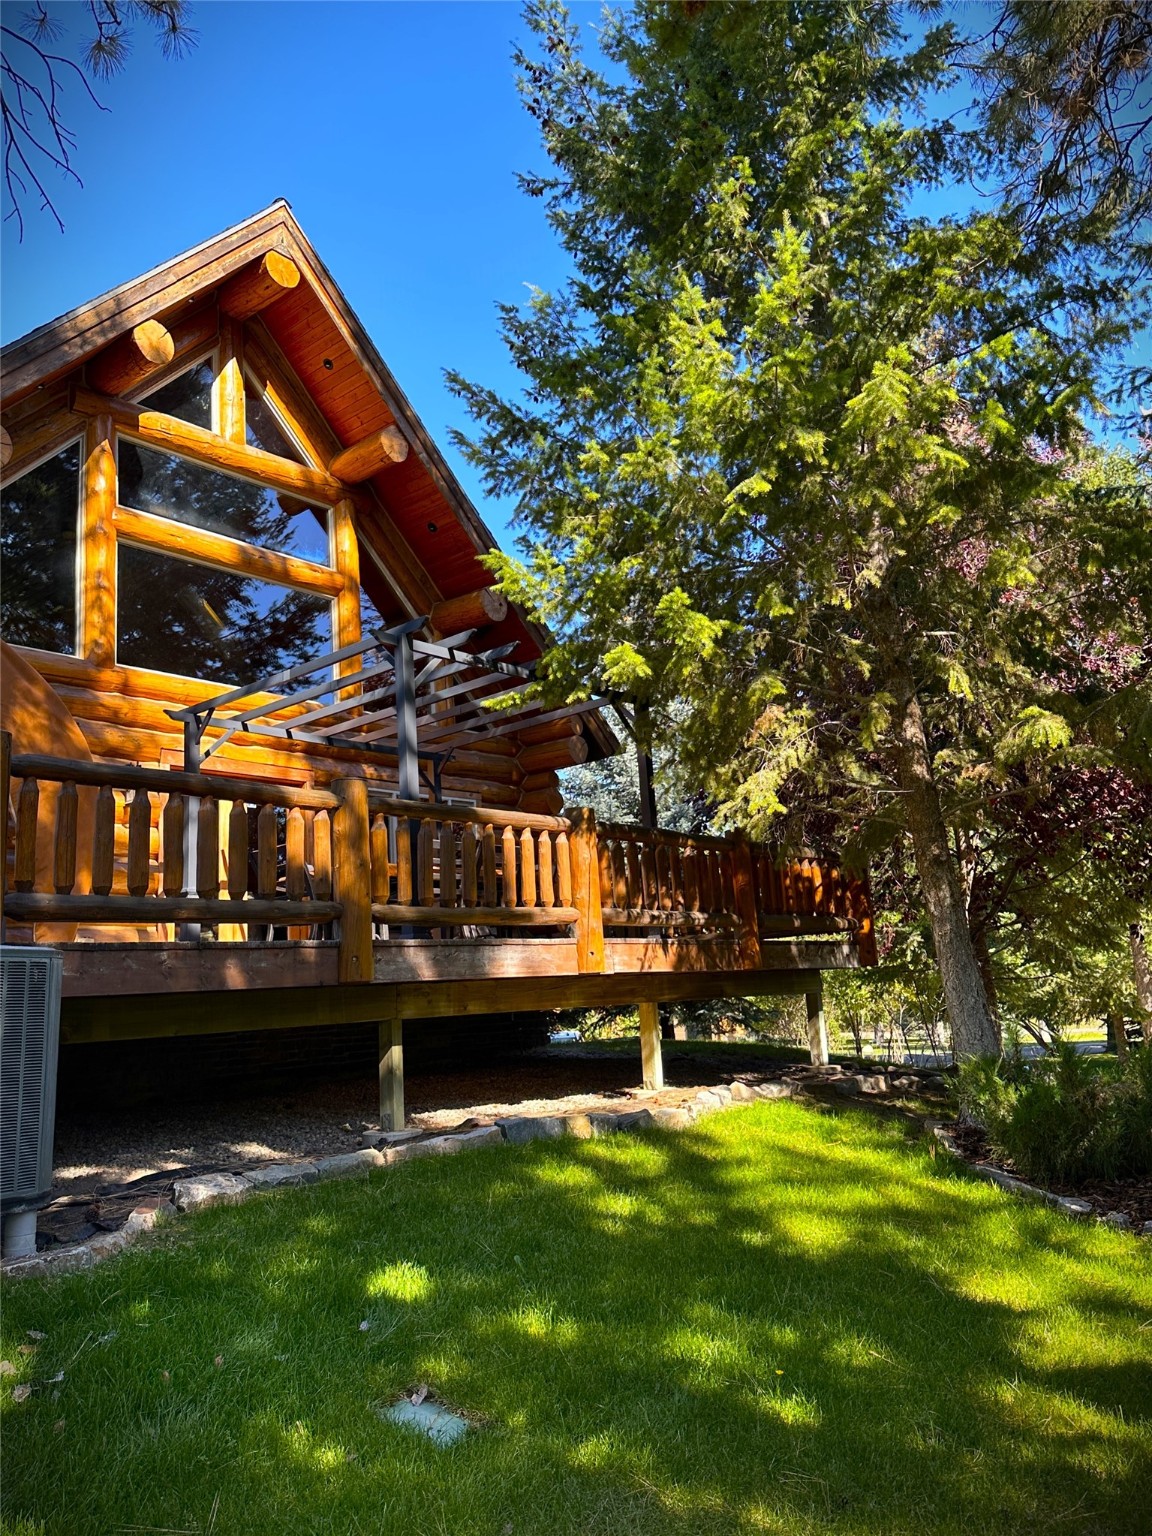 Welcome to Abeyance Bay! Tucked away in the picturesque corner of Montana along Lake Koocanusa. This avantgarde home boasts~2,200 sq.ft. of living space 2b, 3bth & loft could be transformed into an additional bedroom & comes fully furnished along with a beautifully landscaped yard for your convenience. Located just a 15-minute drive from the border, ~1+hr from Glacier Park, Airport, ski resorts, & Flathead Valley, you'll have access to an array of recreational opportunities. Furthermore, this home is conveniently located adjacent to Abeyance Bay, granting access to water sports, fishing & the exploration of the hundreds of miles of pristine shoreline & unspoiled wilderness, in addition to world class concerts & fine dining.  thoughtfully priced to account for any necessary maintenance/repairs. Offering you the chance to make it your own while enjoying the wonderful surroundings. For more info or to arrange a showing Call Rick 406-249-3109 or your real estate professional today!